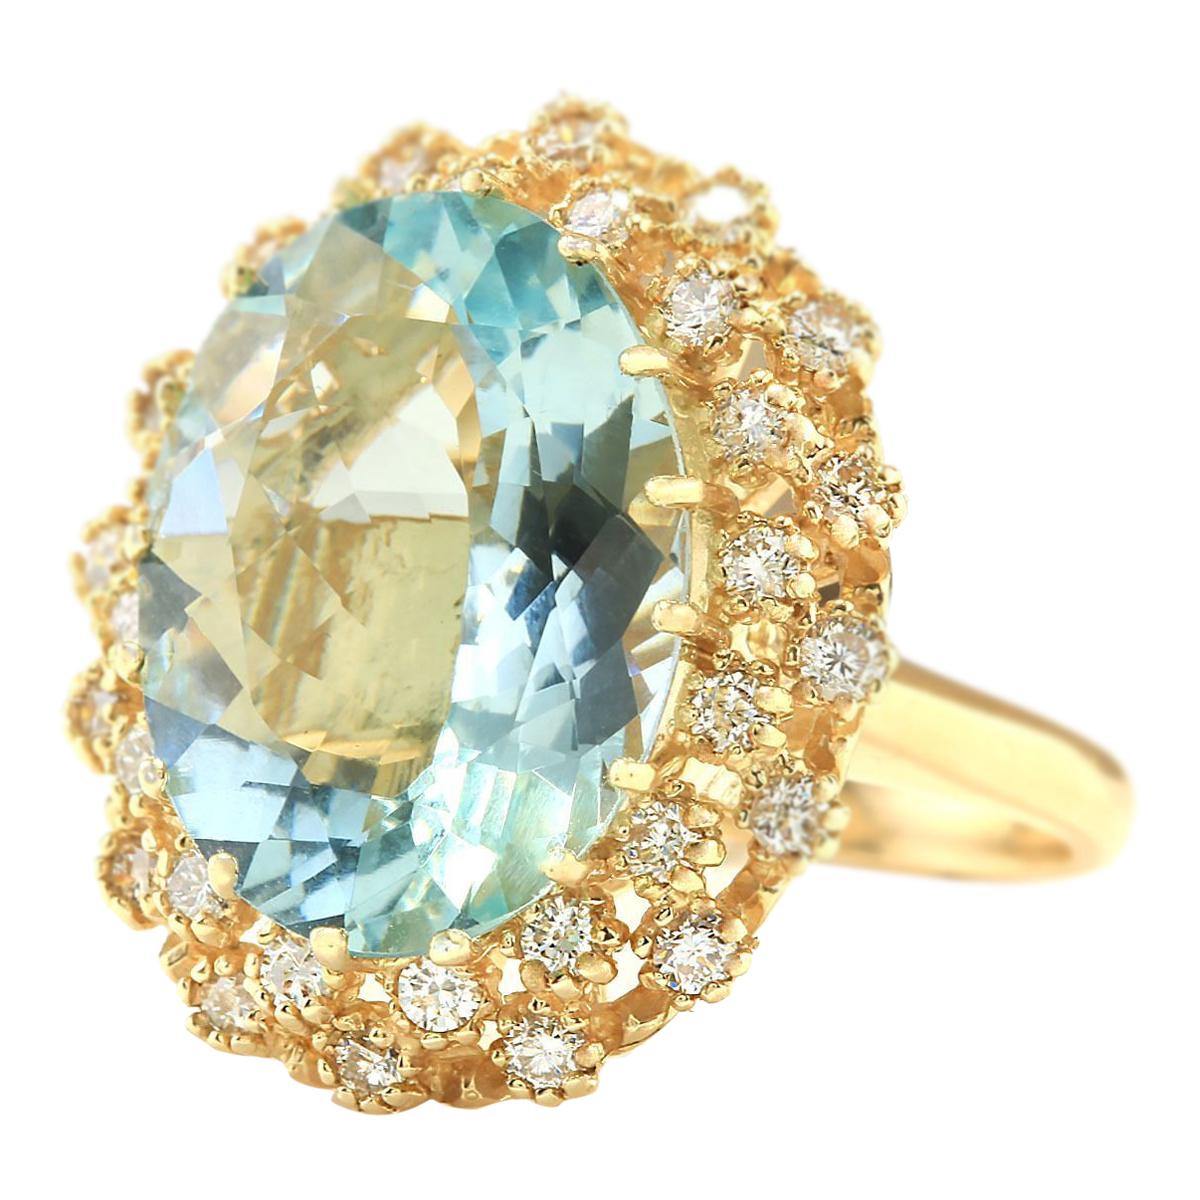 Stamped: 14K Yellow Gold
Total Ring Weight: 10.8 Grams
Total Natural Aquamarine Weight is 9.28 Carat (Measures: 18.00x13.00 mm)
Color: Blue
Total Natural Diamond Weight is 1.00 Carat
Quantity: 32
Color: F-G, Clarity: VS2-SI1
Face Measures: